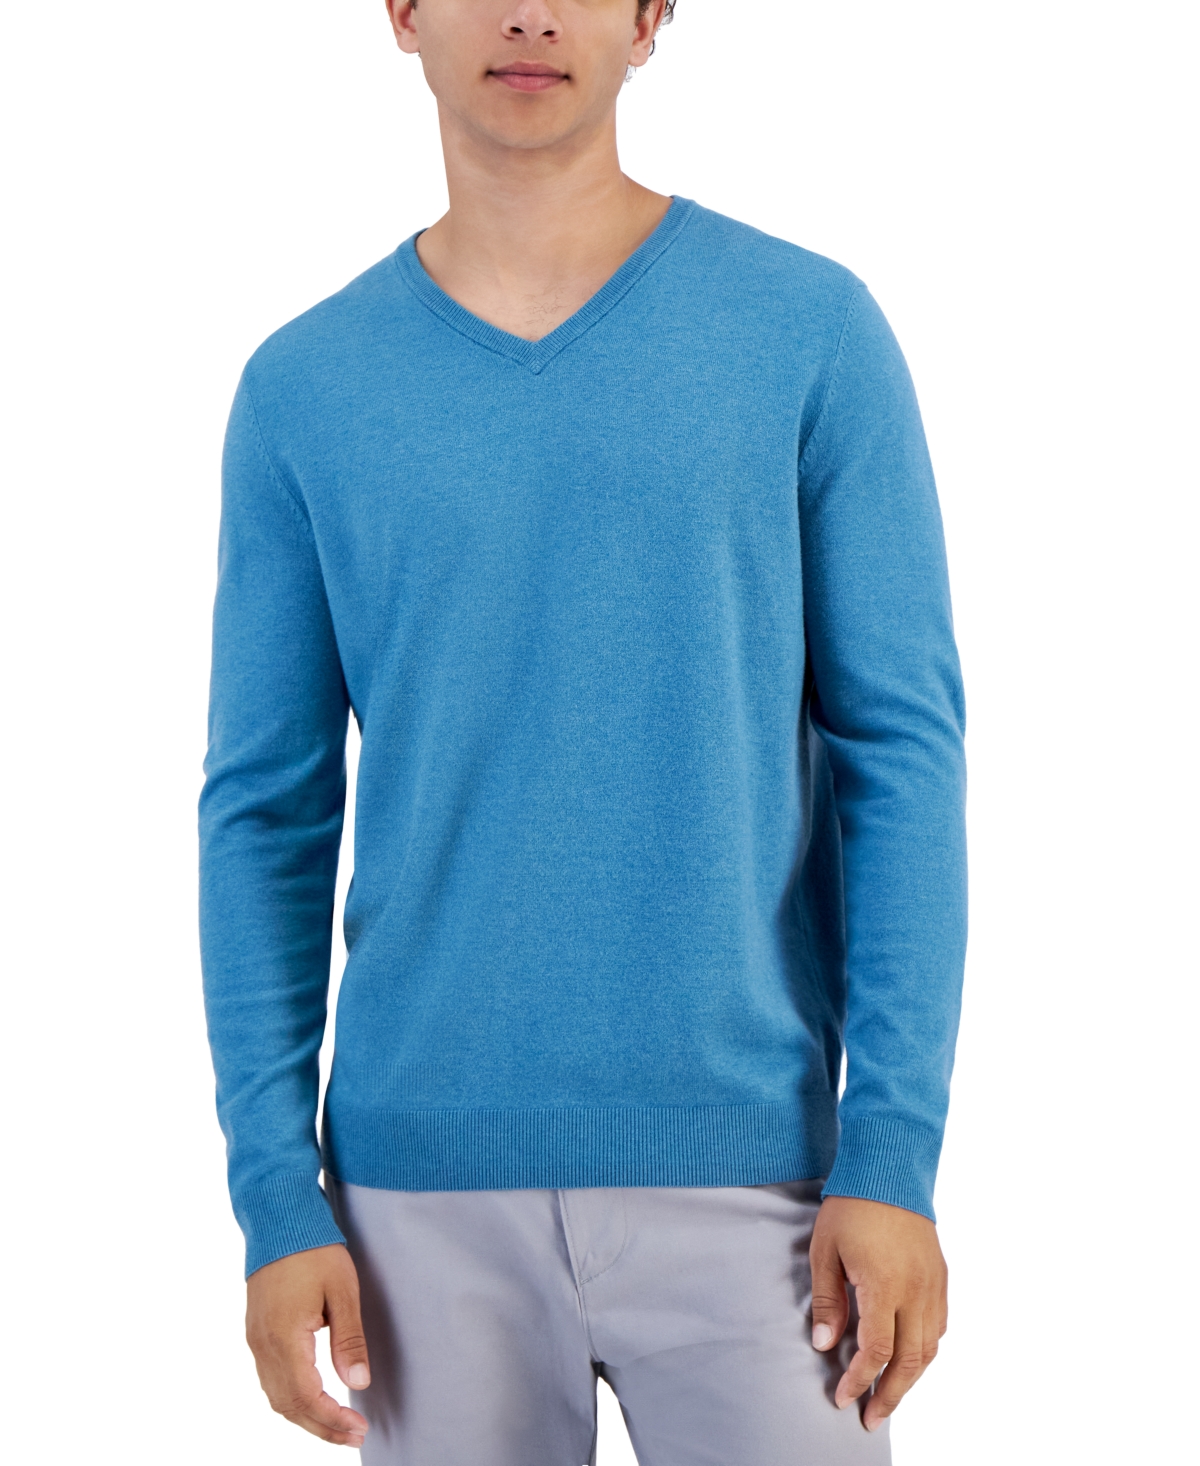 Men's Solid V-Neck Cotton Sweater, Created for Macy's - Deep Patina